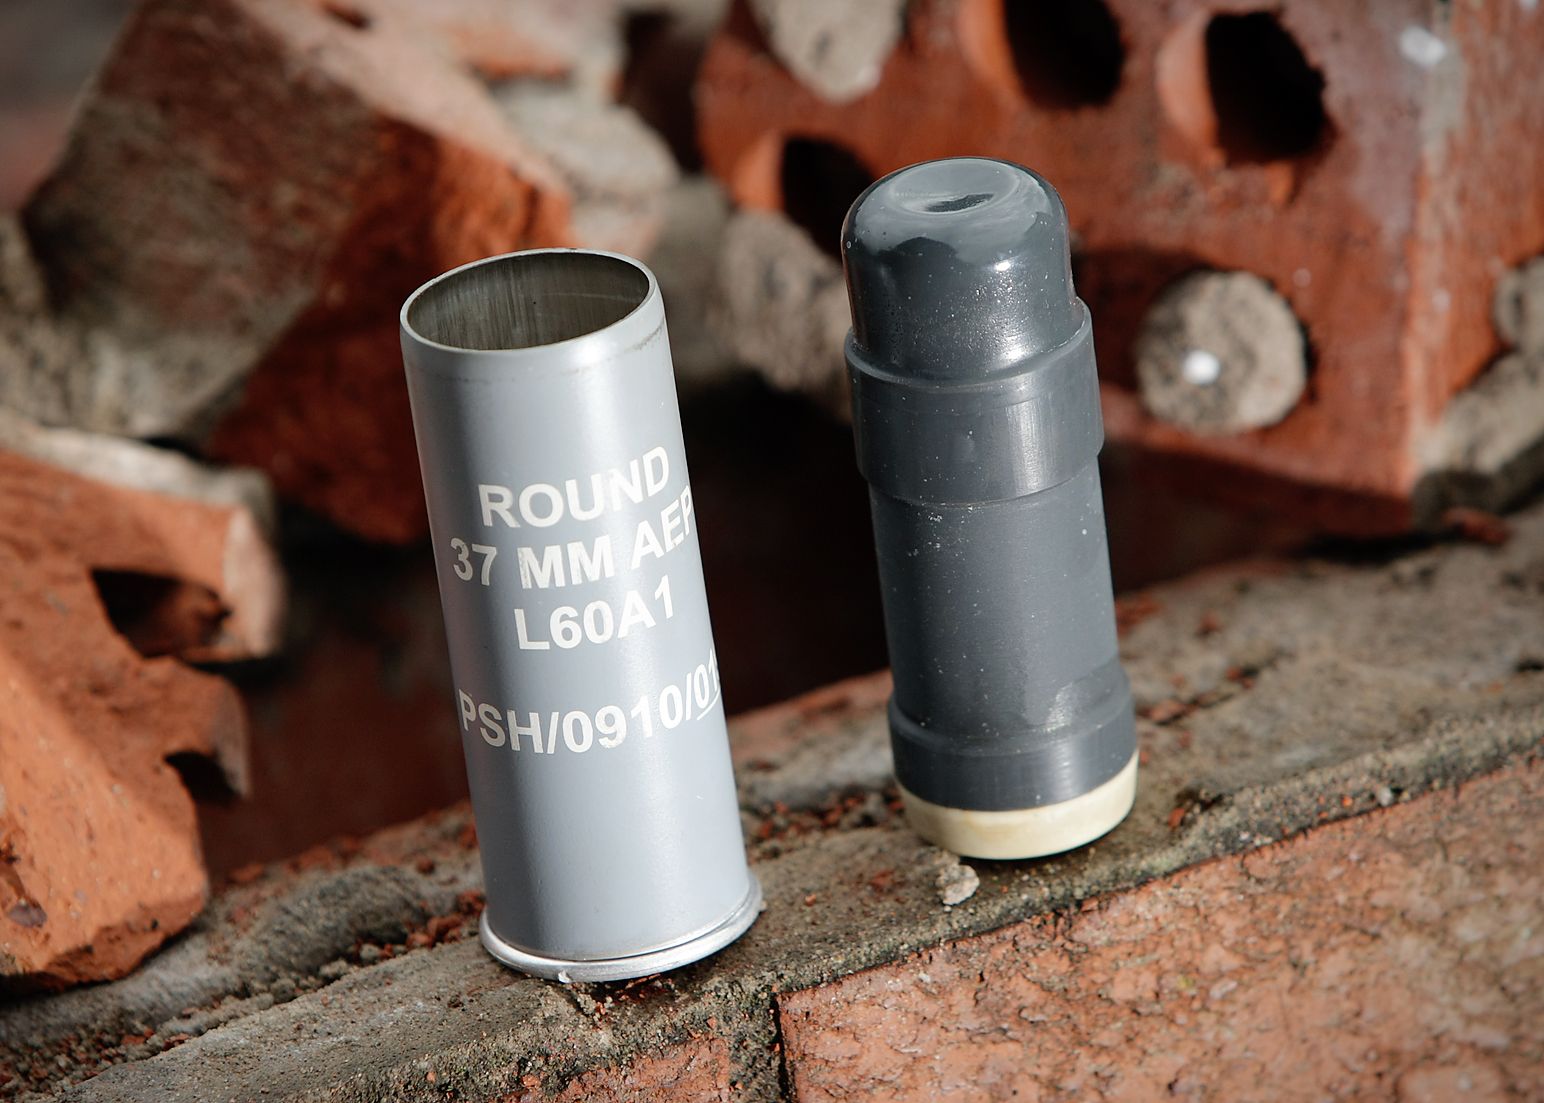 CONDEMNED: Plastic bullets have killed 17 people in the North of Ireland